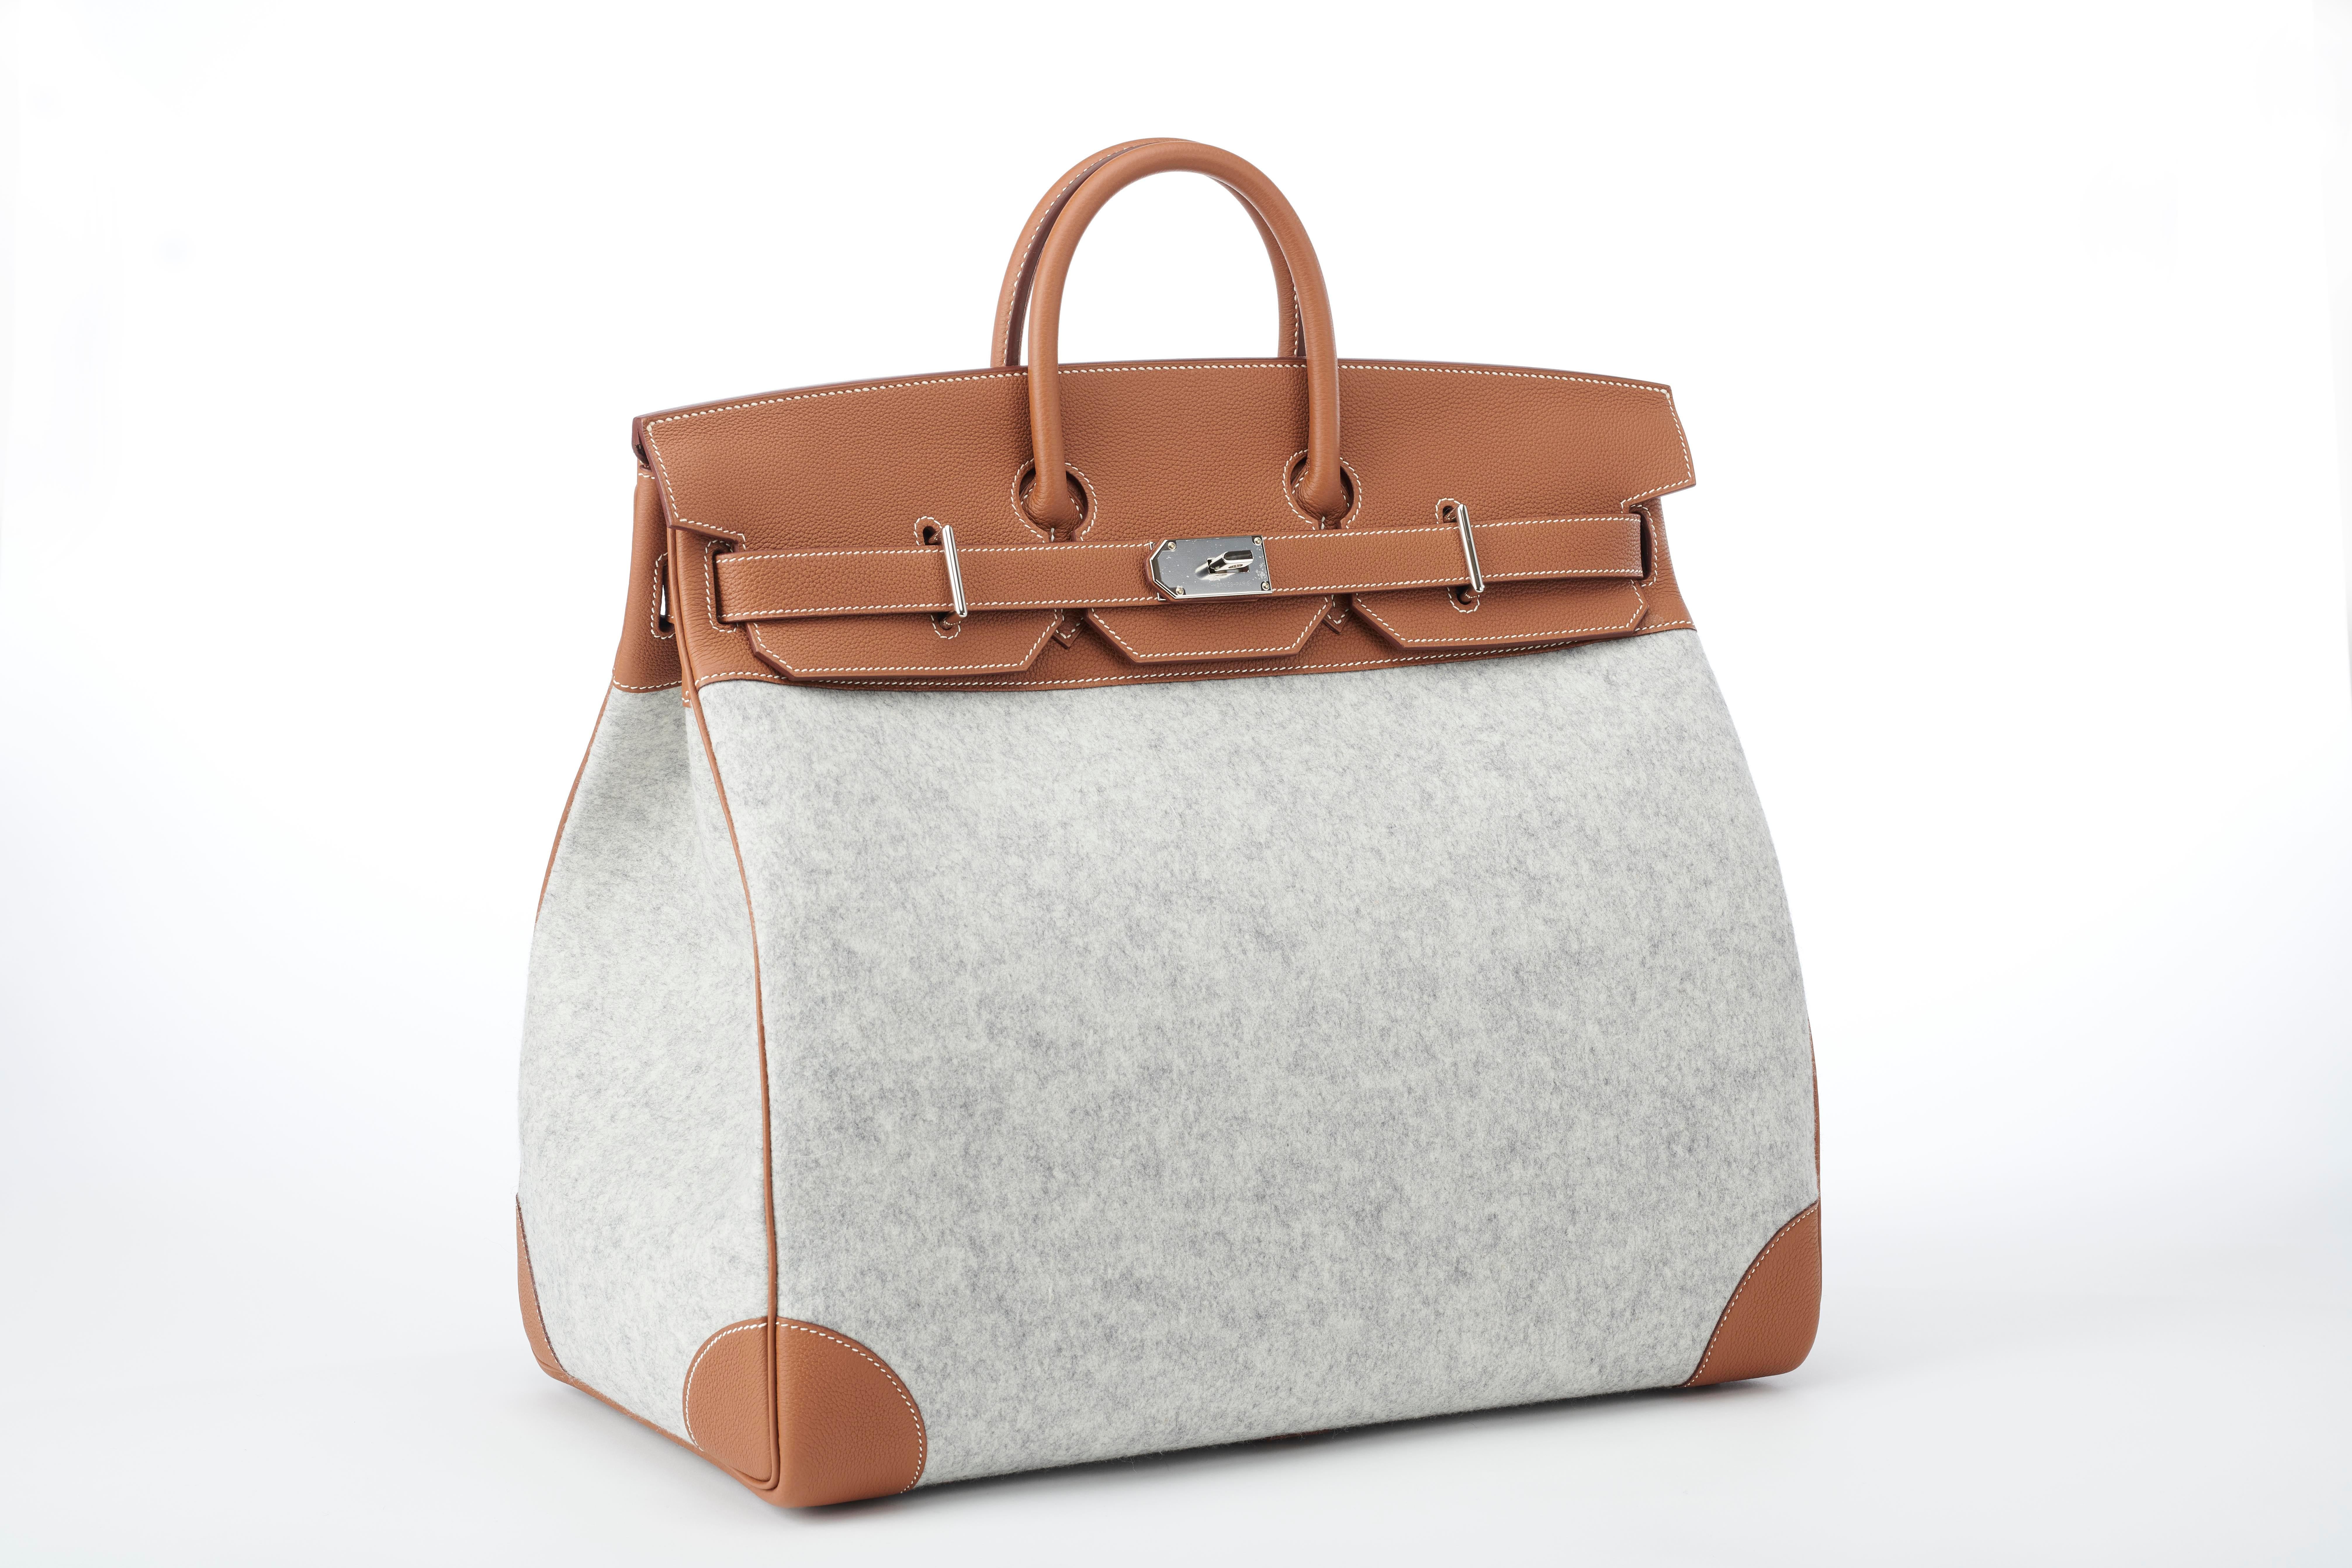 New, unworn limited edition Hermes Birkin HAC 50cm TODOO in Gold Togo leather and Gris Clair Wool Felt and palladum hardware.  

This bag is the perfect travel companion - the 50cm size makes it a practical and stylish carry on and the durable wool